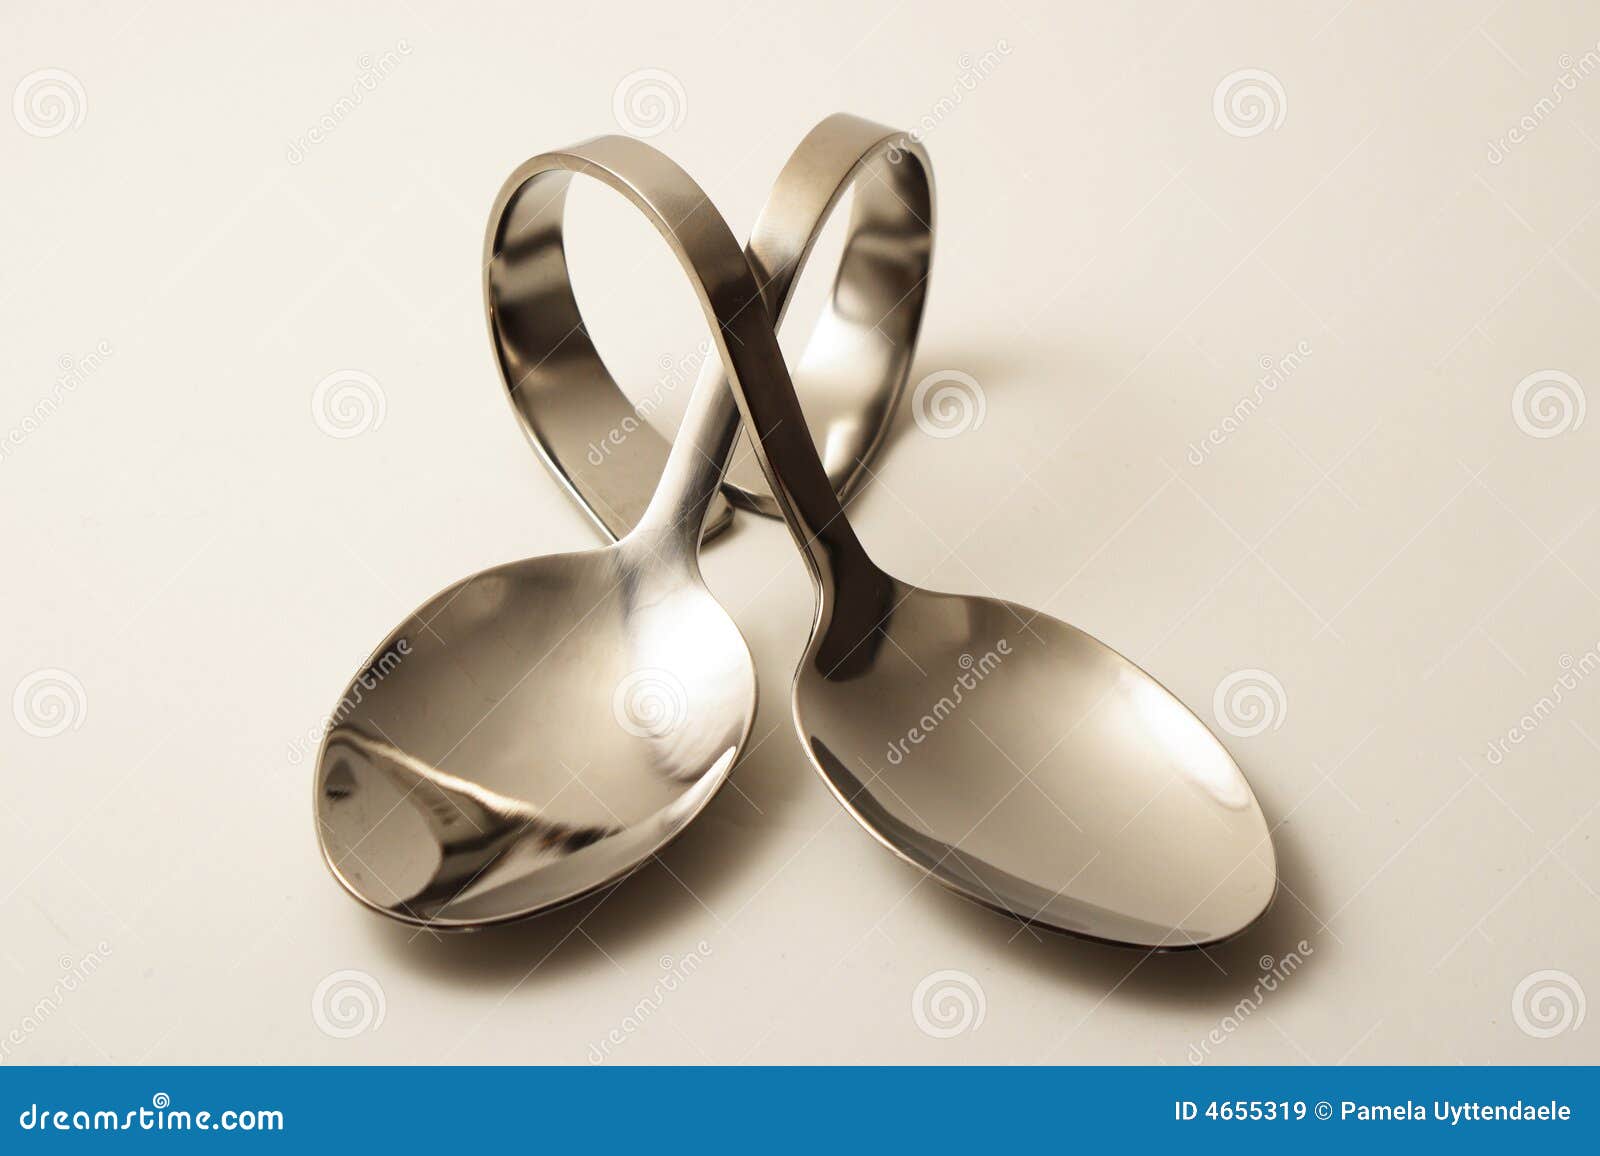 two crossed party spoons